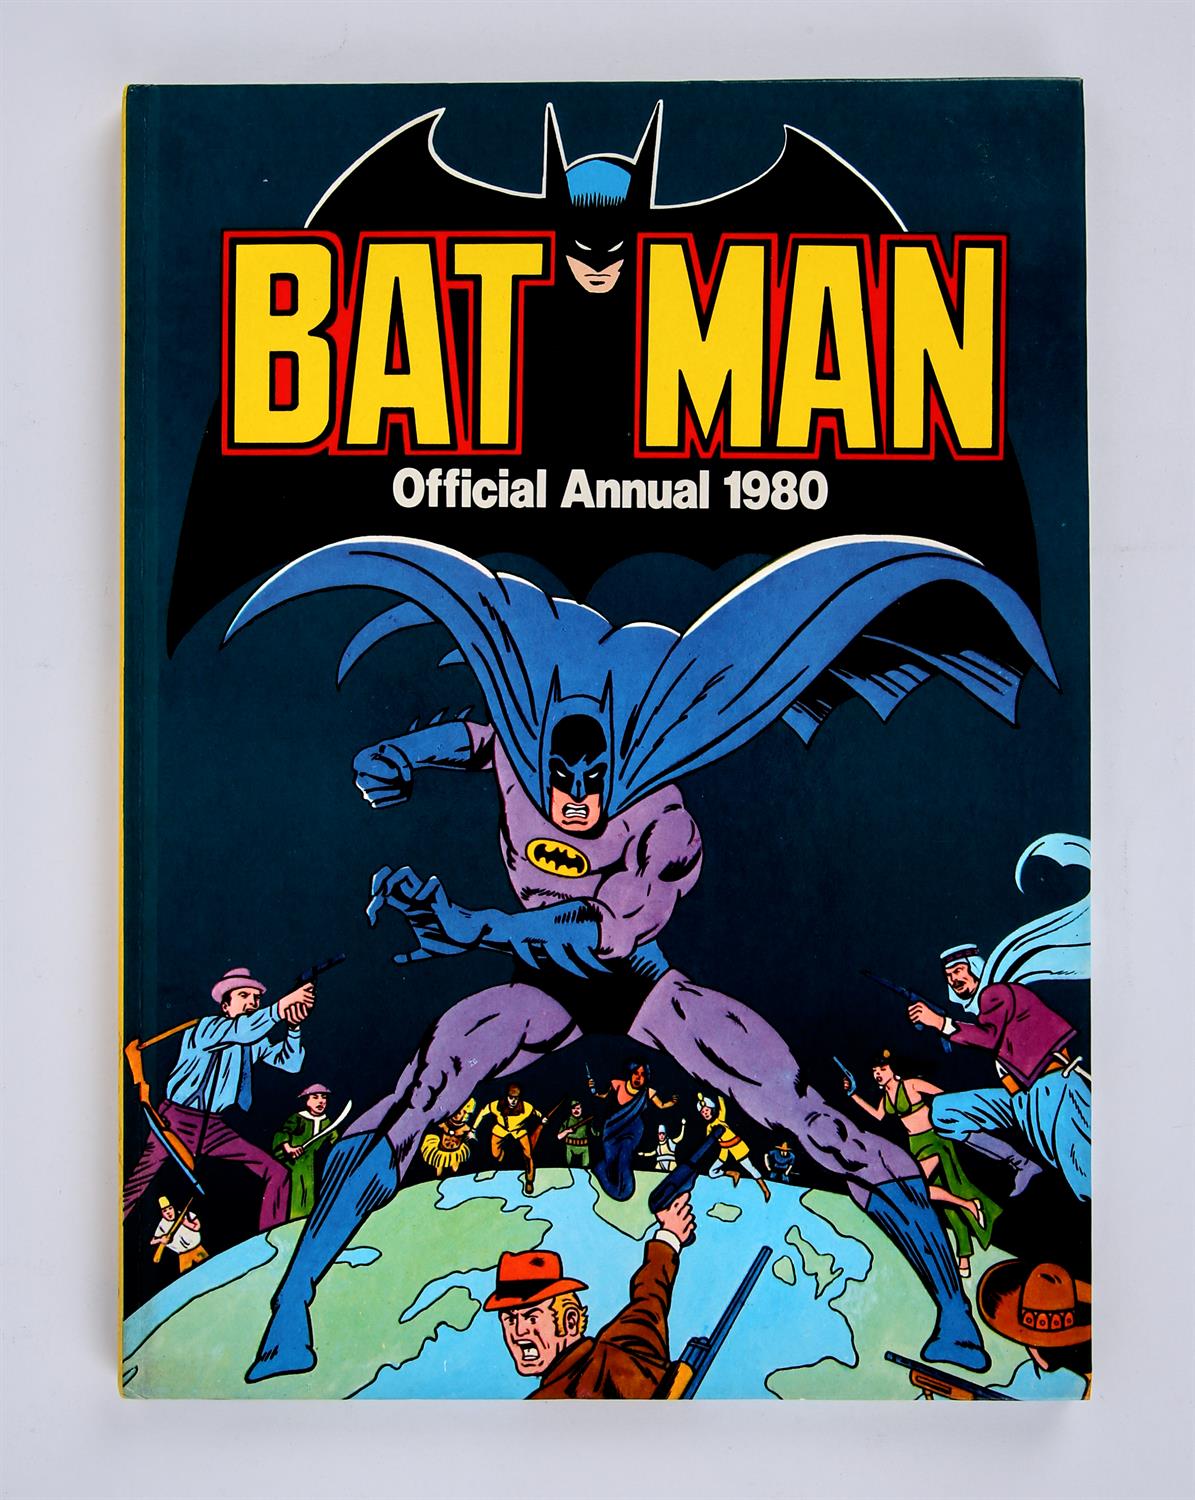 Batman Annual 1980 Signed by Adam West (1980) This lot features: Batman official Annual 1980,